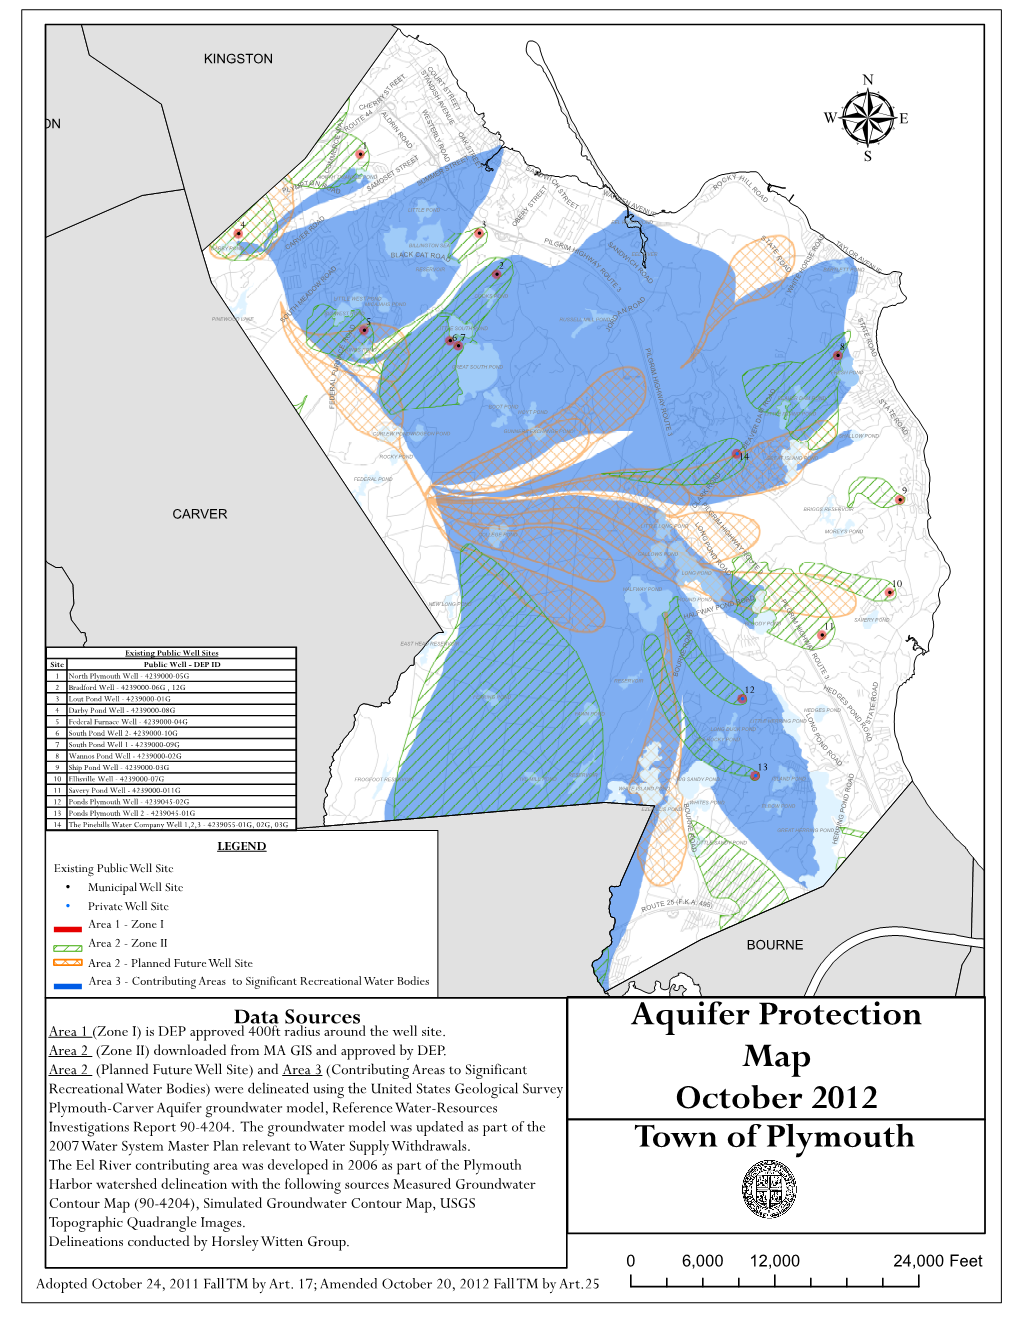 Aquifer Protection Map October 2012 Town of Plymouth